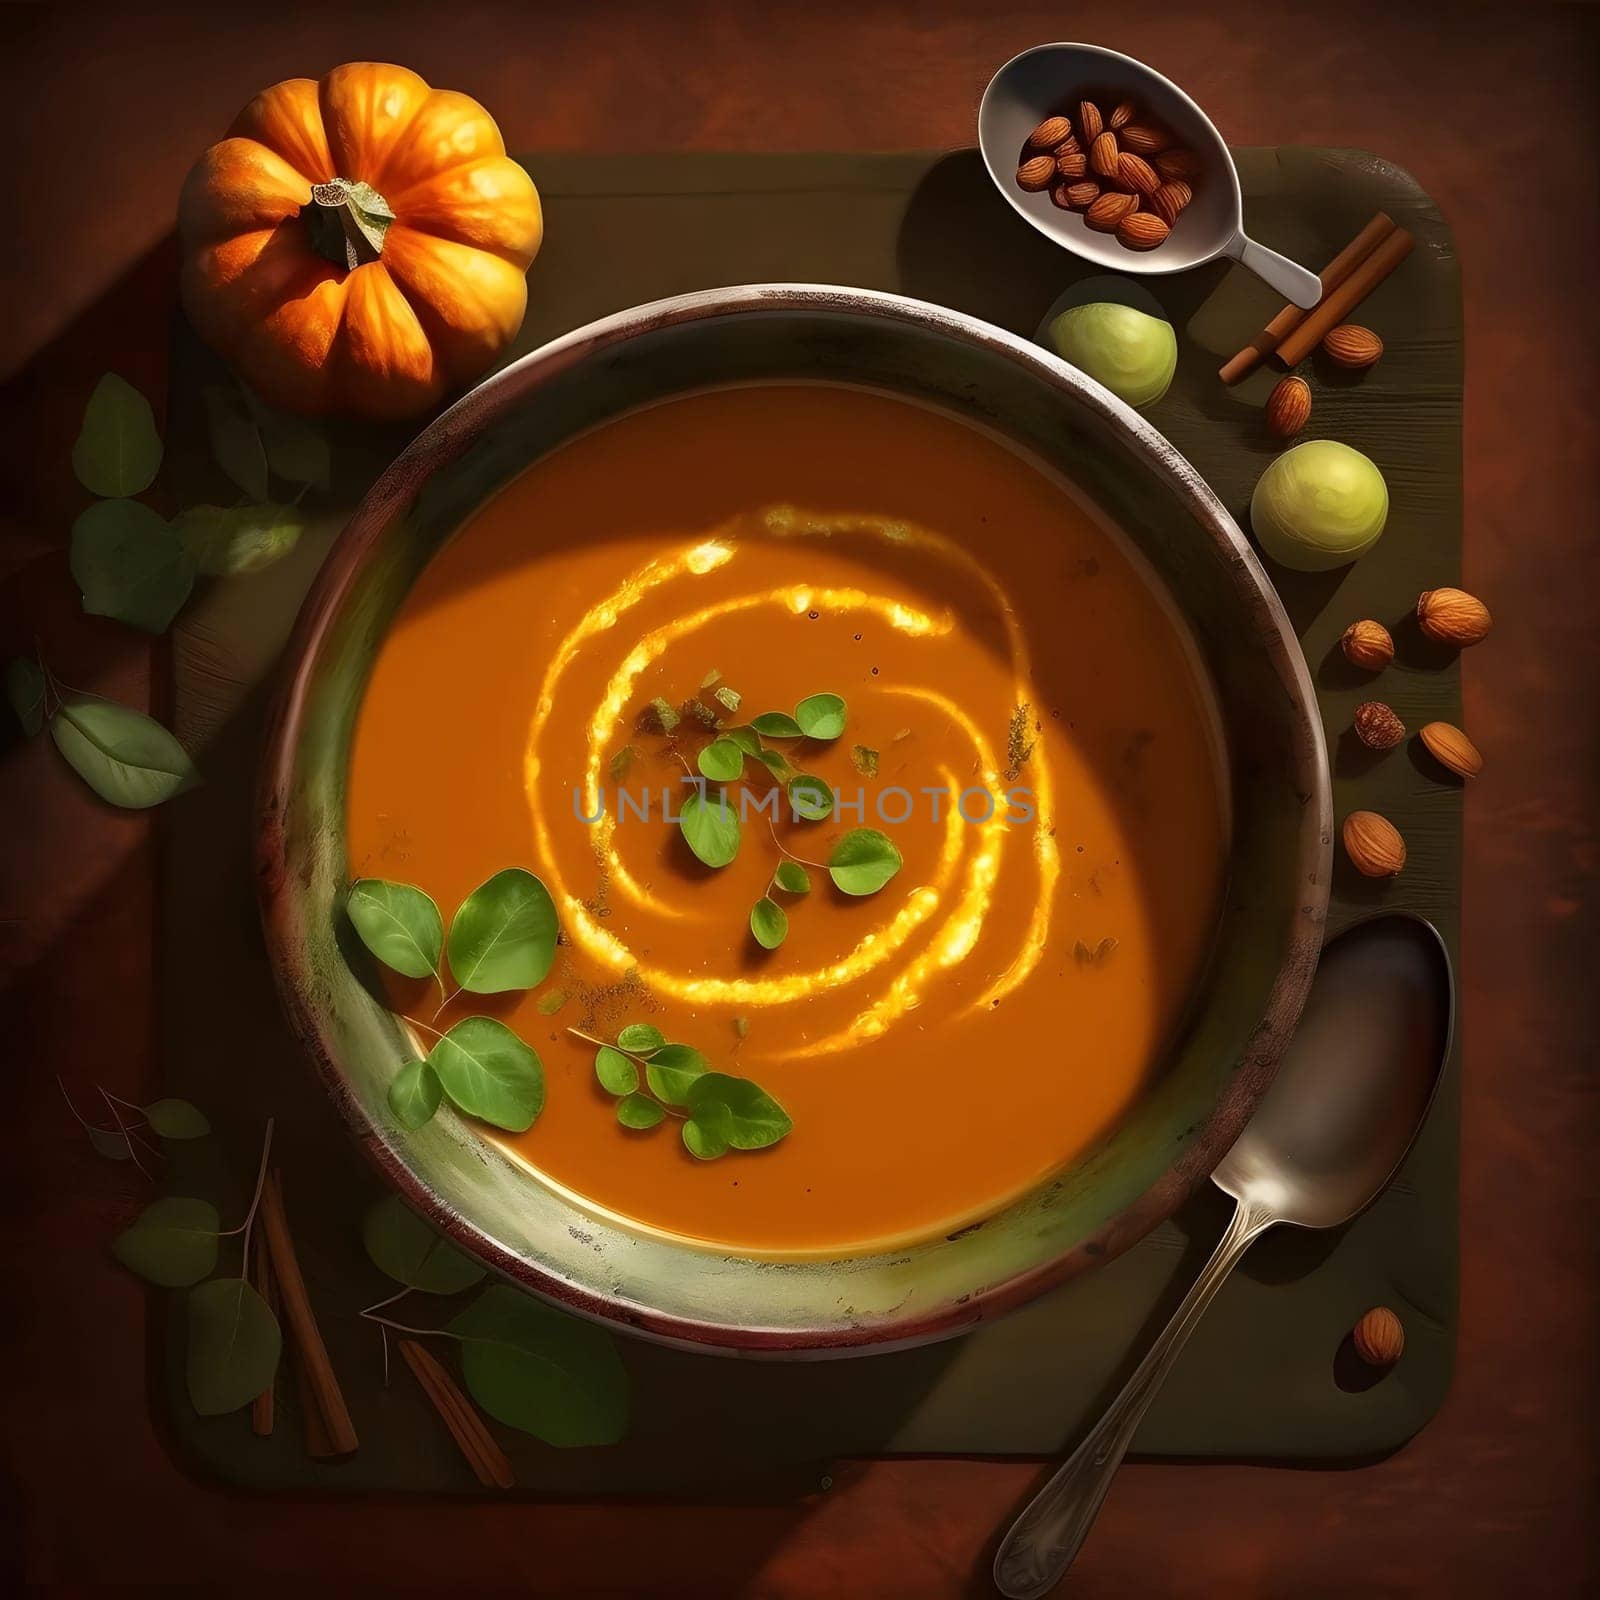 Top view of pumpkin soup, around the spices of the spoon leaves. Pumpkin as a dish of thanksgiving for the harvest. by ThemesS